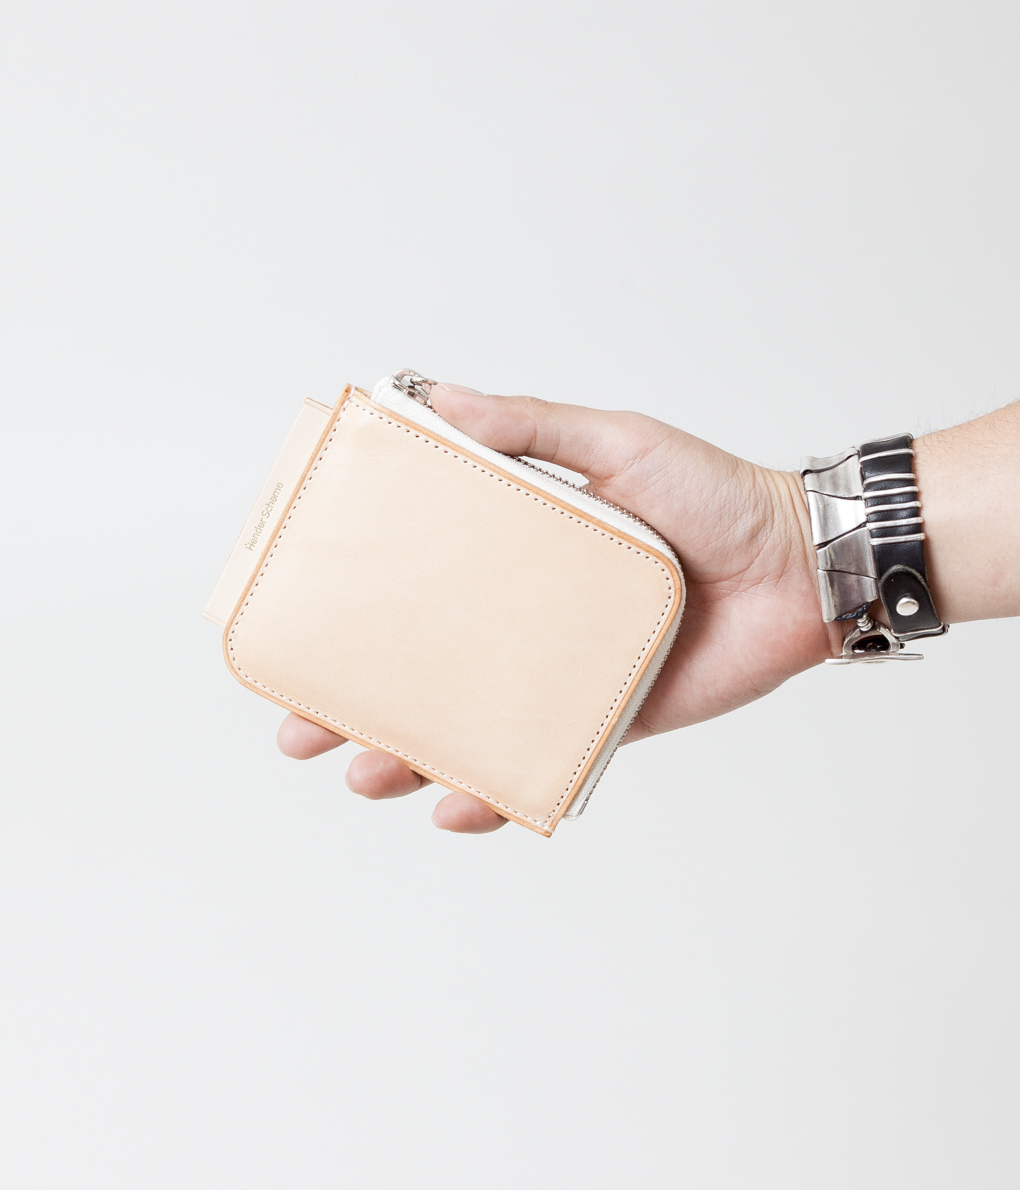 New Arrival “Hender Scheme L purse” | well-made by MAIDENS SHOP